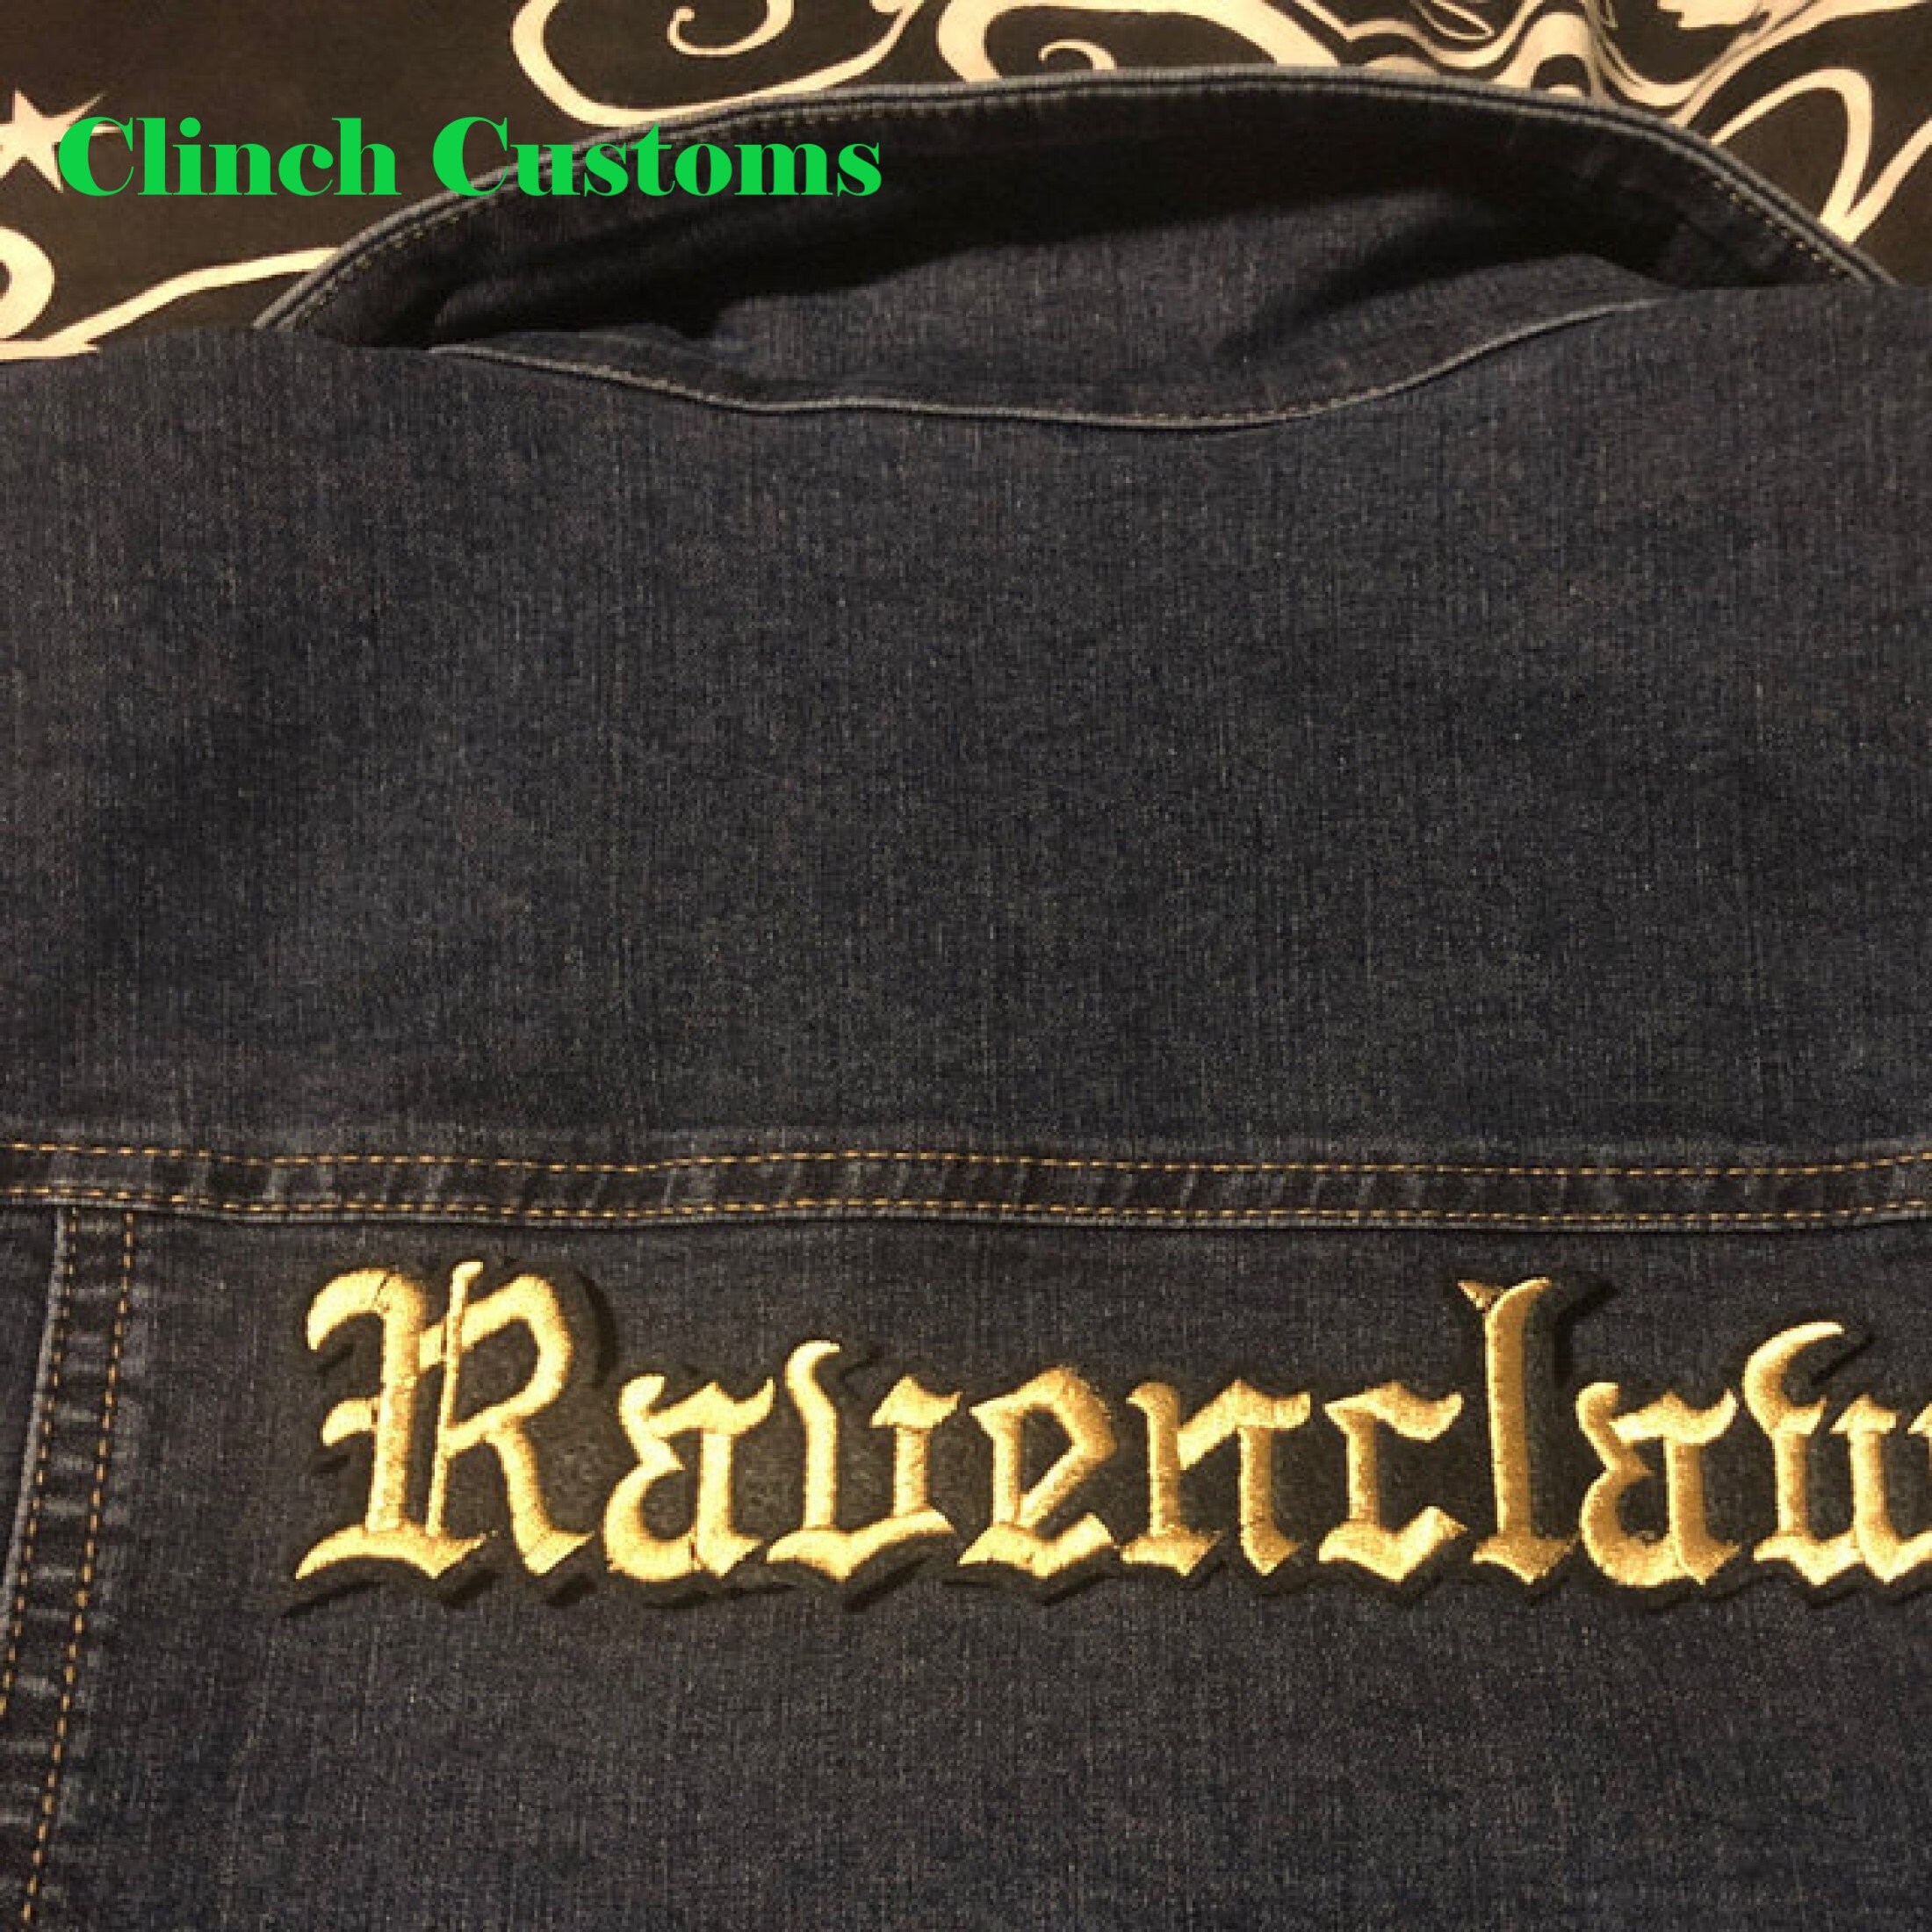 Custom Embroidered Iron-on Logo Patches for Jackets, Backpacks, Motorcycle  Club Jackets, & Company Shirts up to 12 Colors 